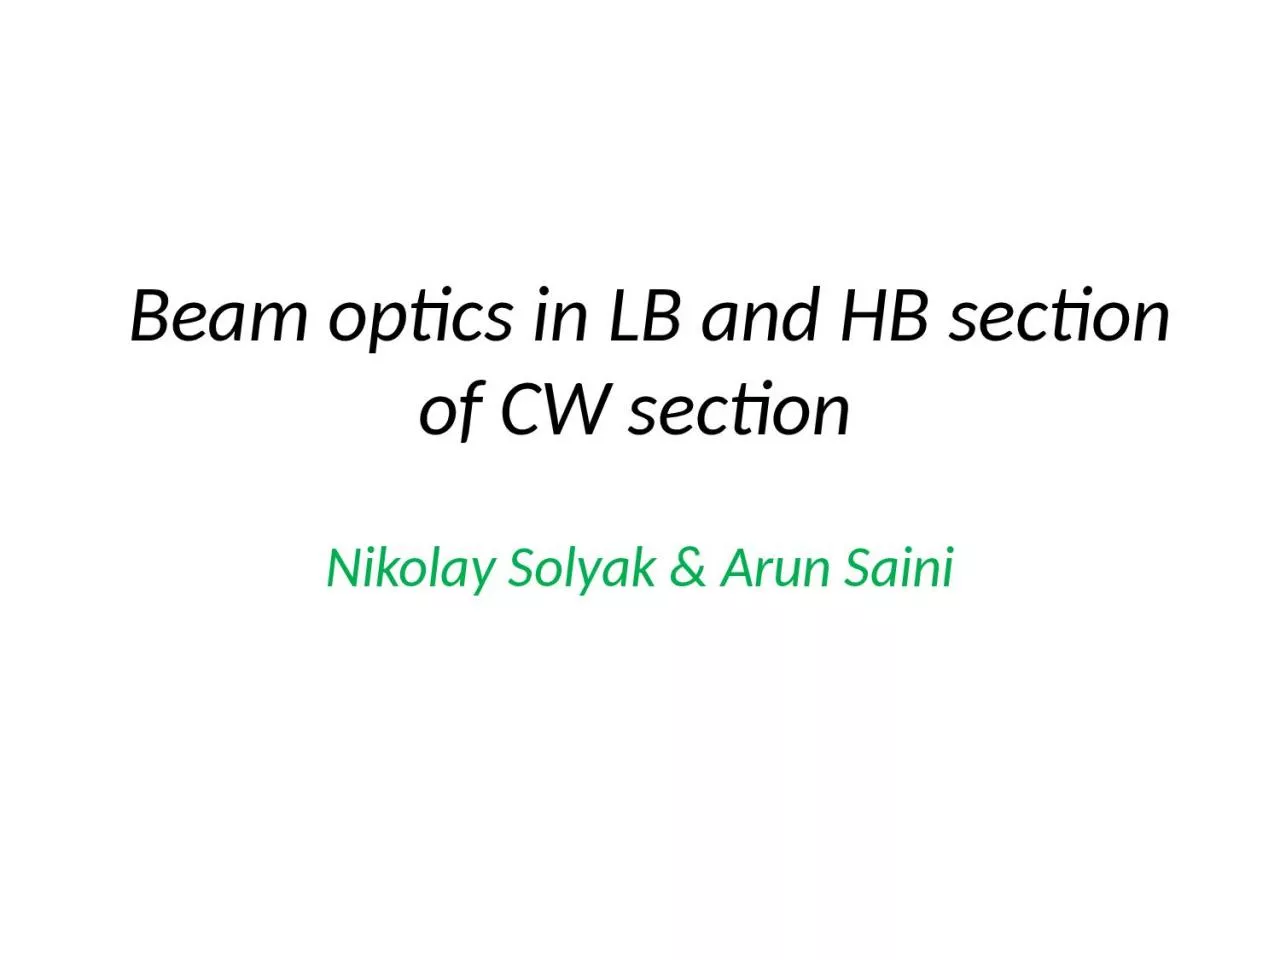 Beam optics in LB and HB section of CW section